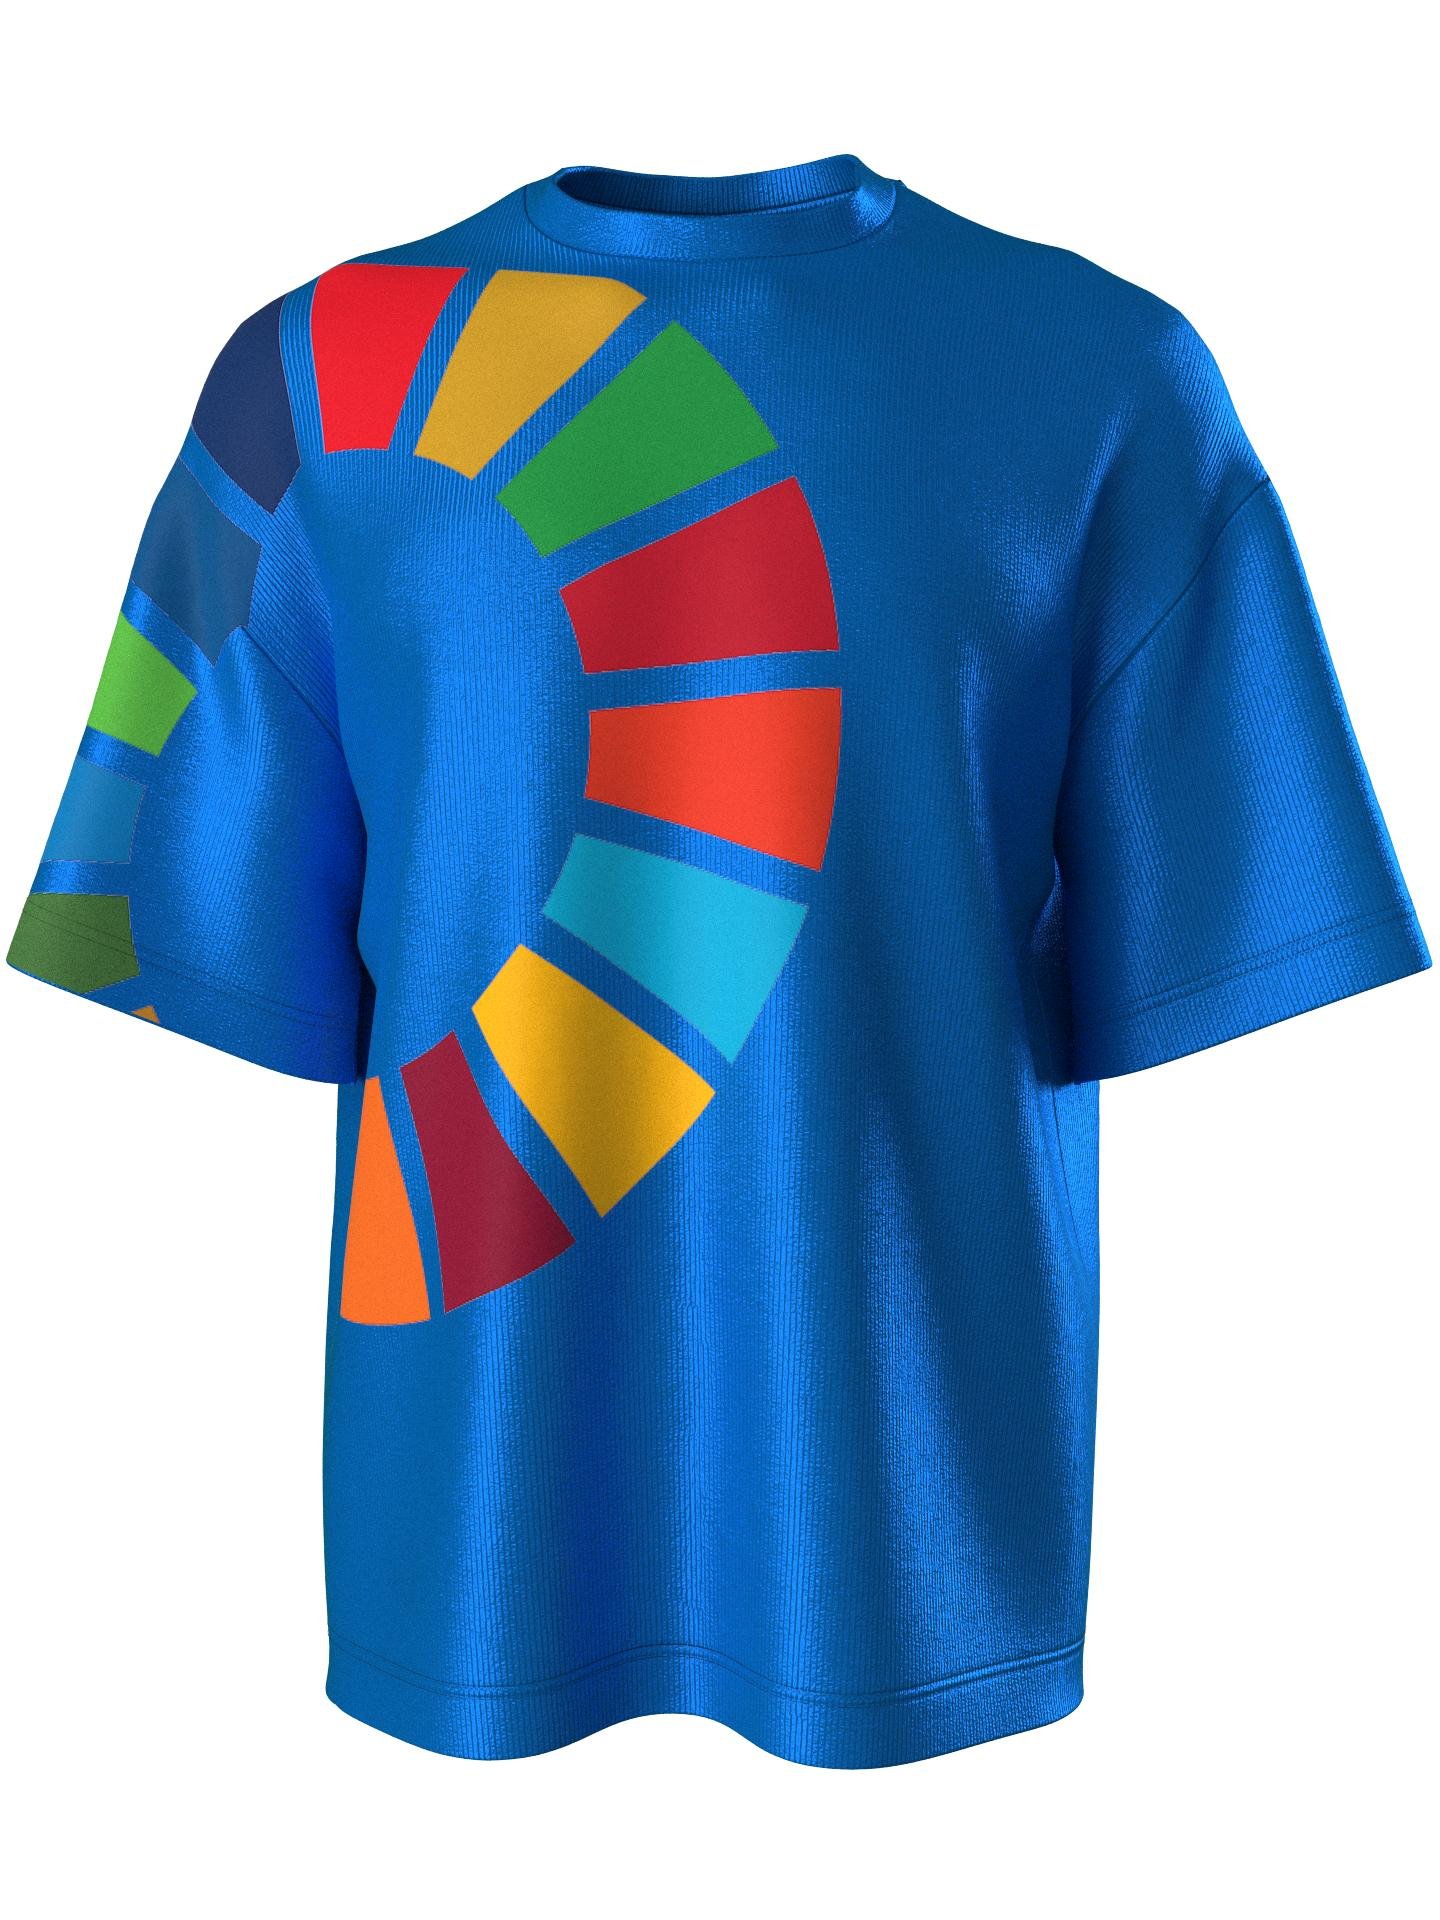 T-shirt with color wheel - ocean blue by SDGS INSPIRED COLLECTION